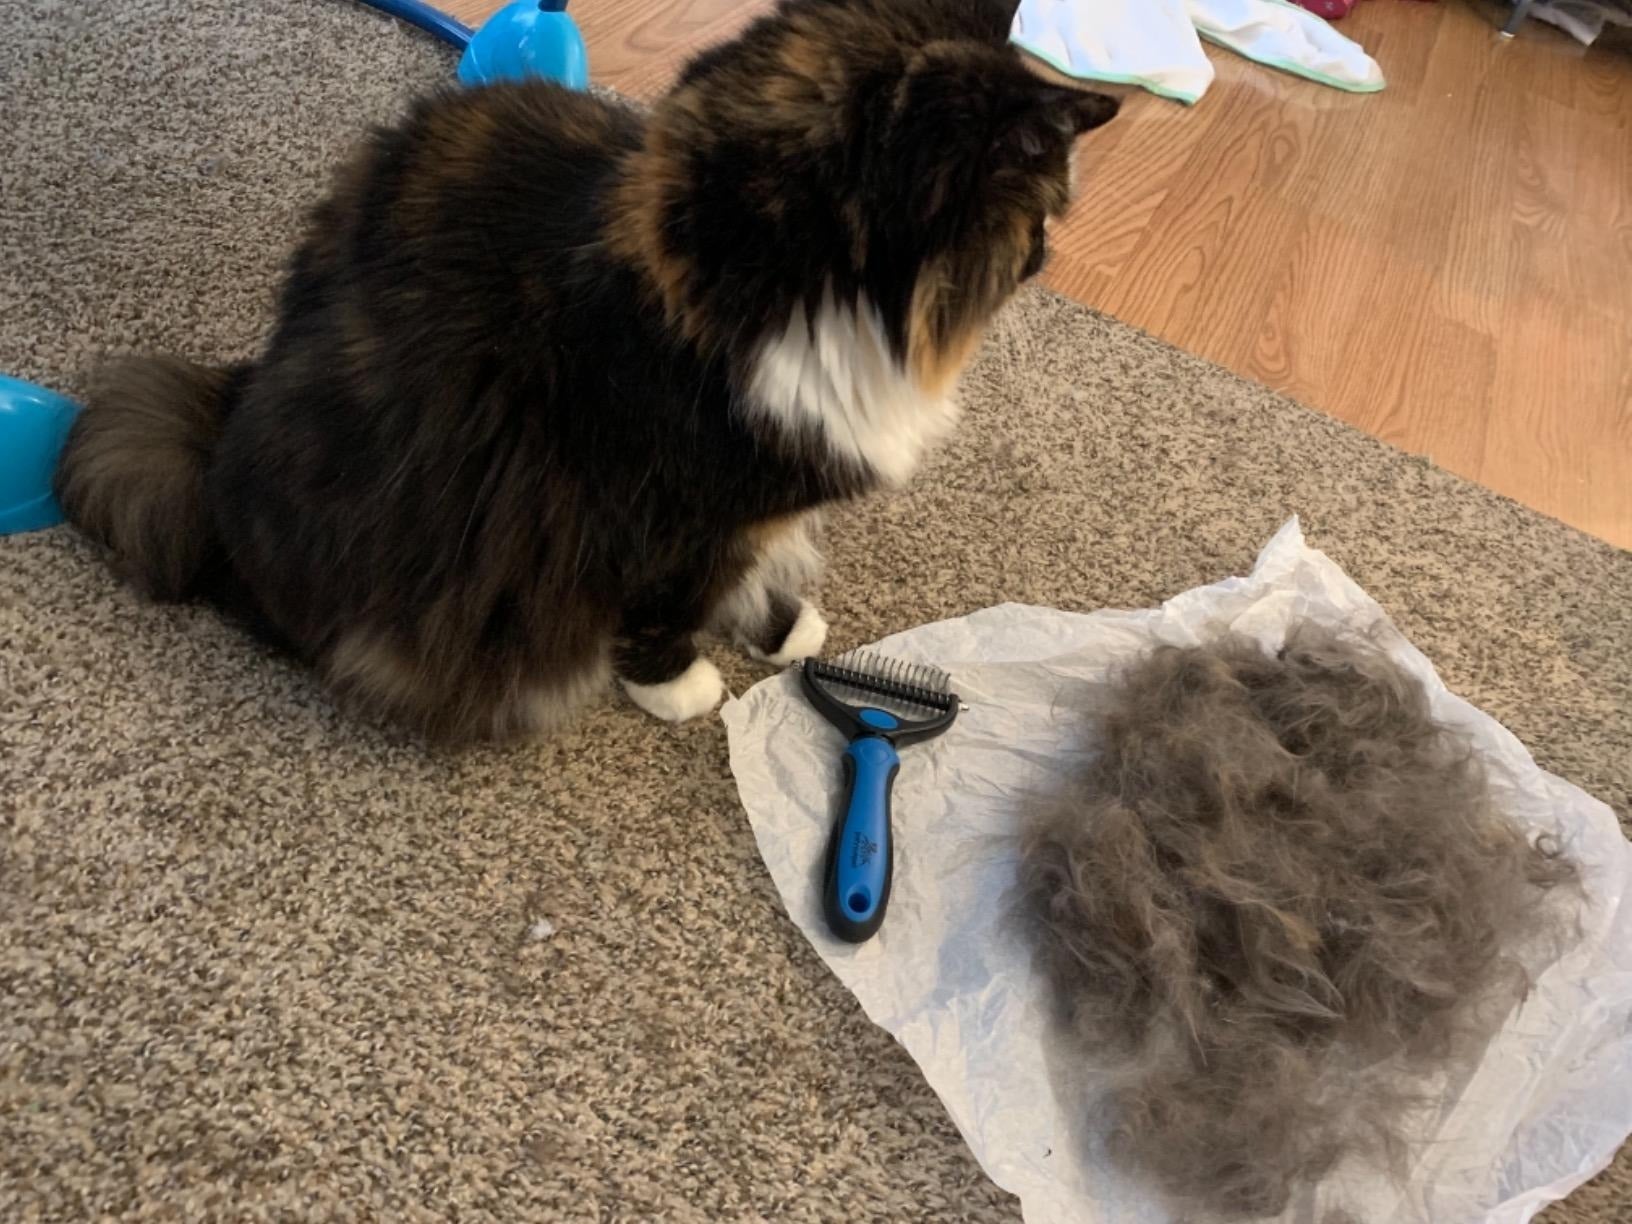 The reviewer's cat next to a pile of shed hair removed by brush